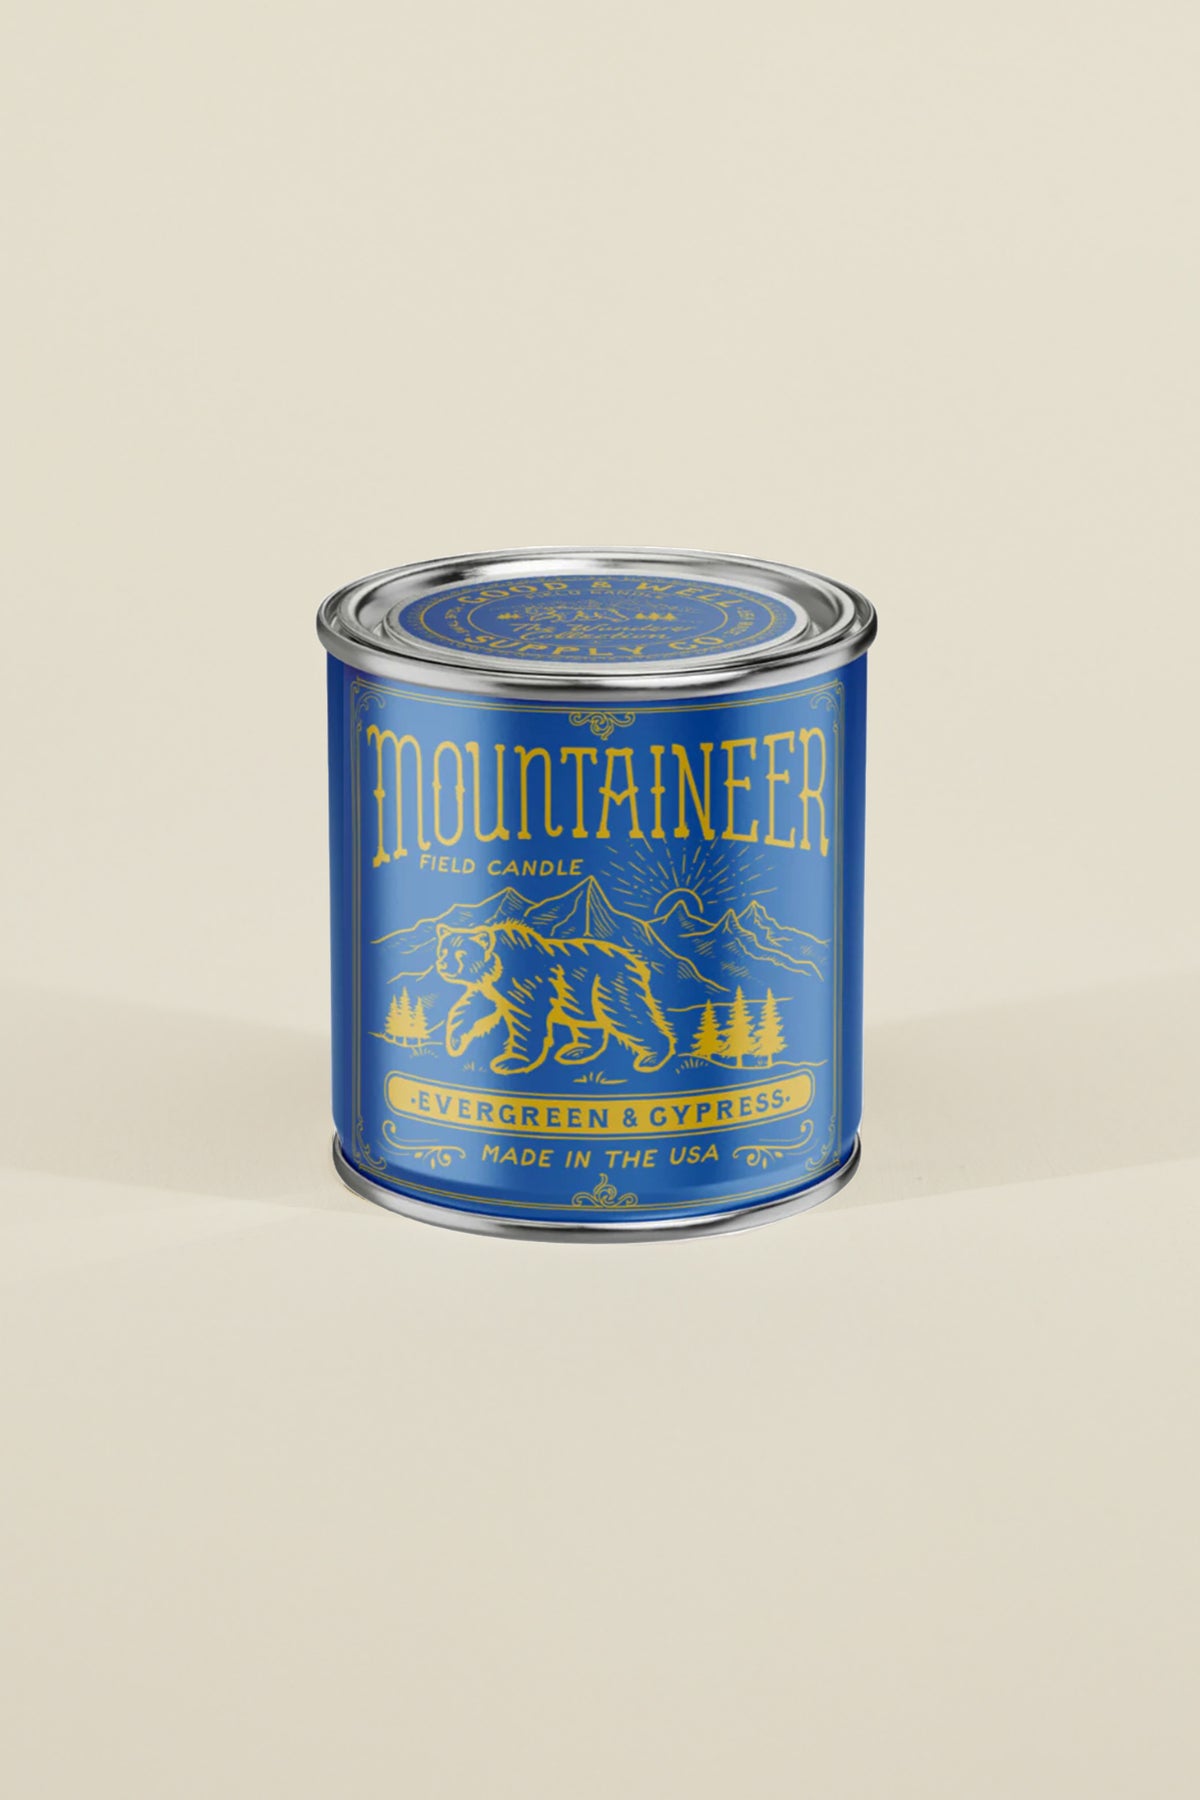 mountaineer field candle